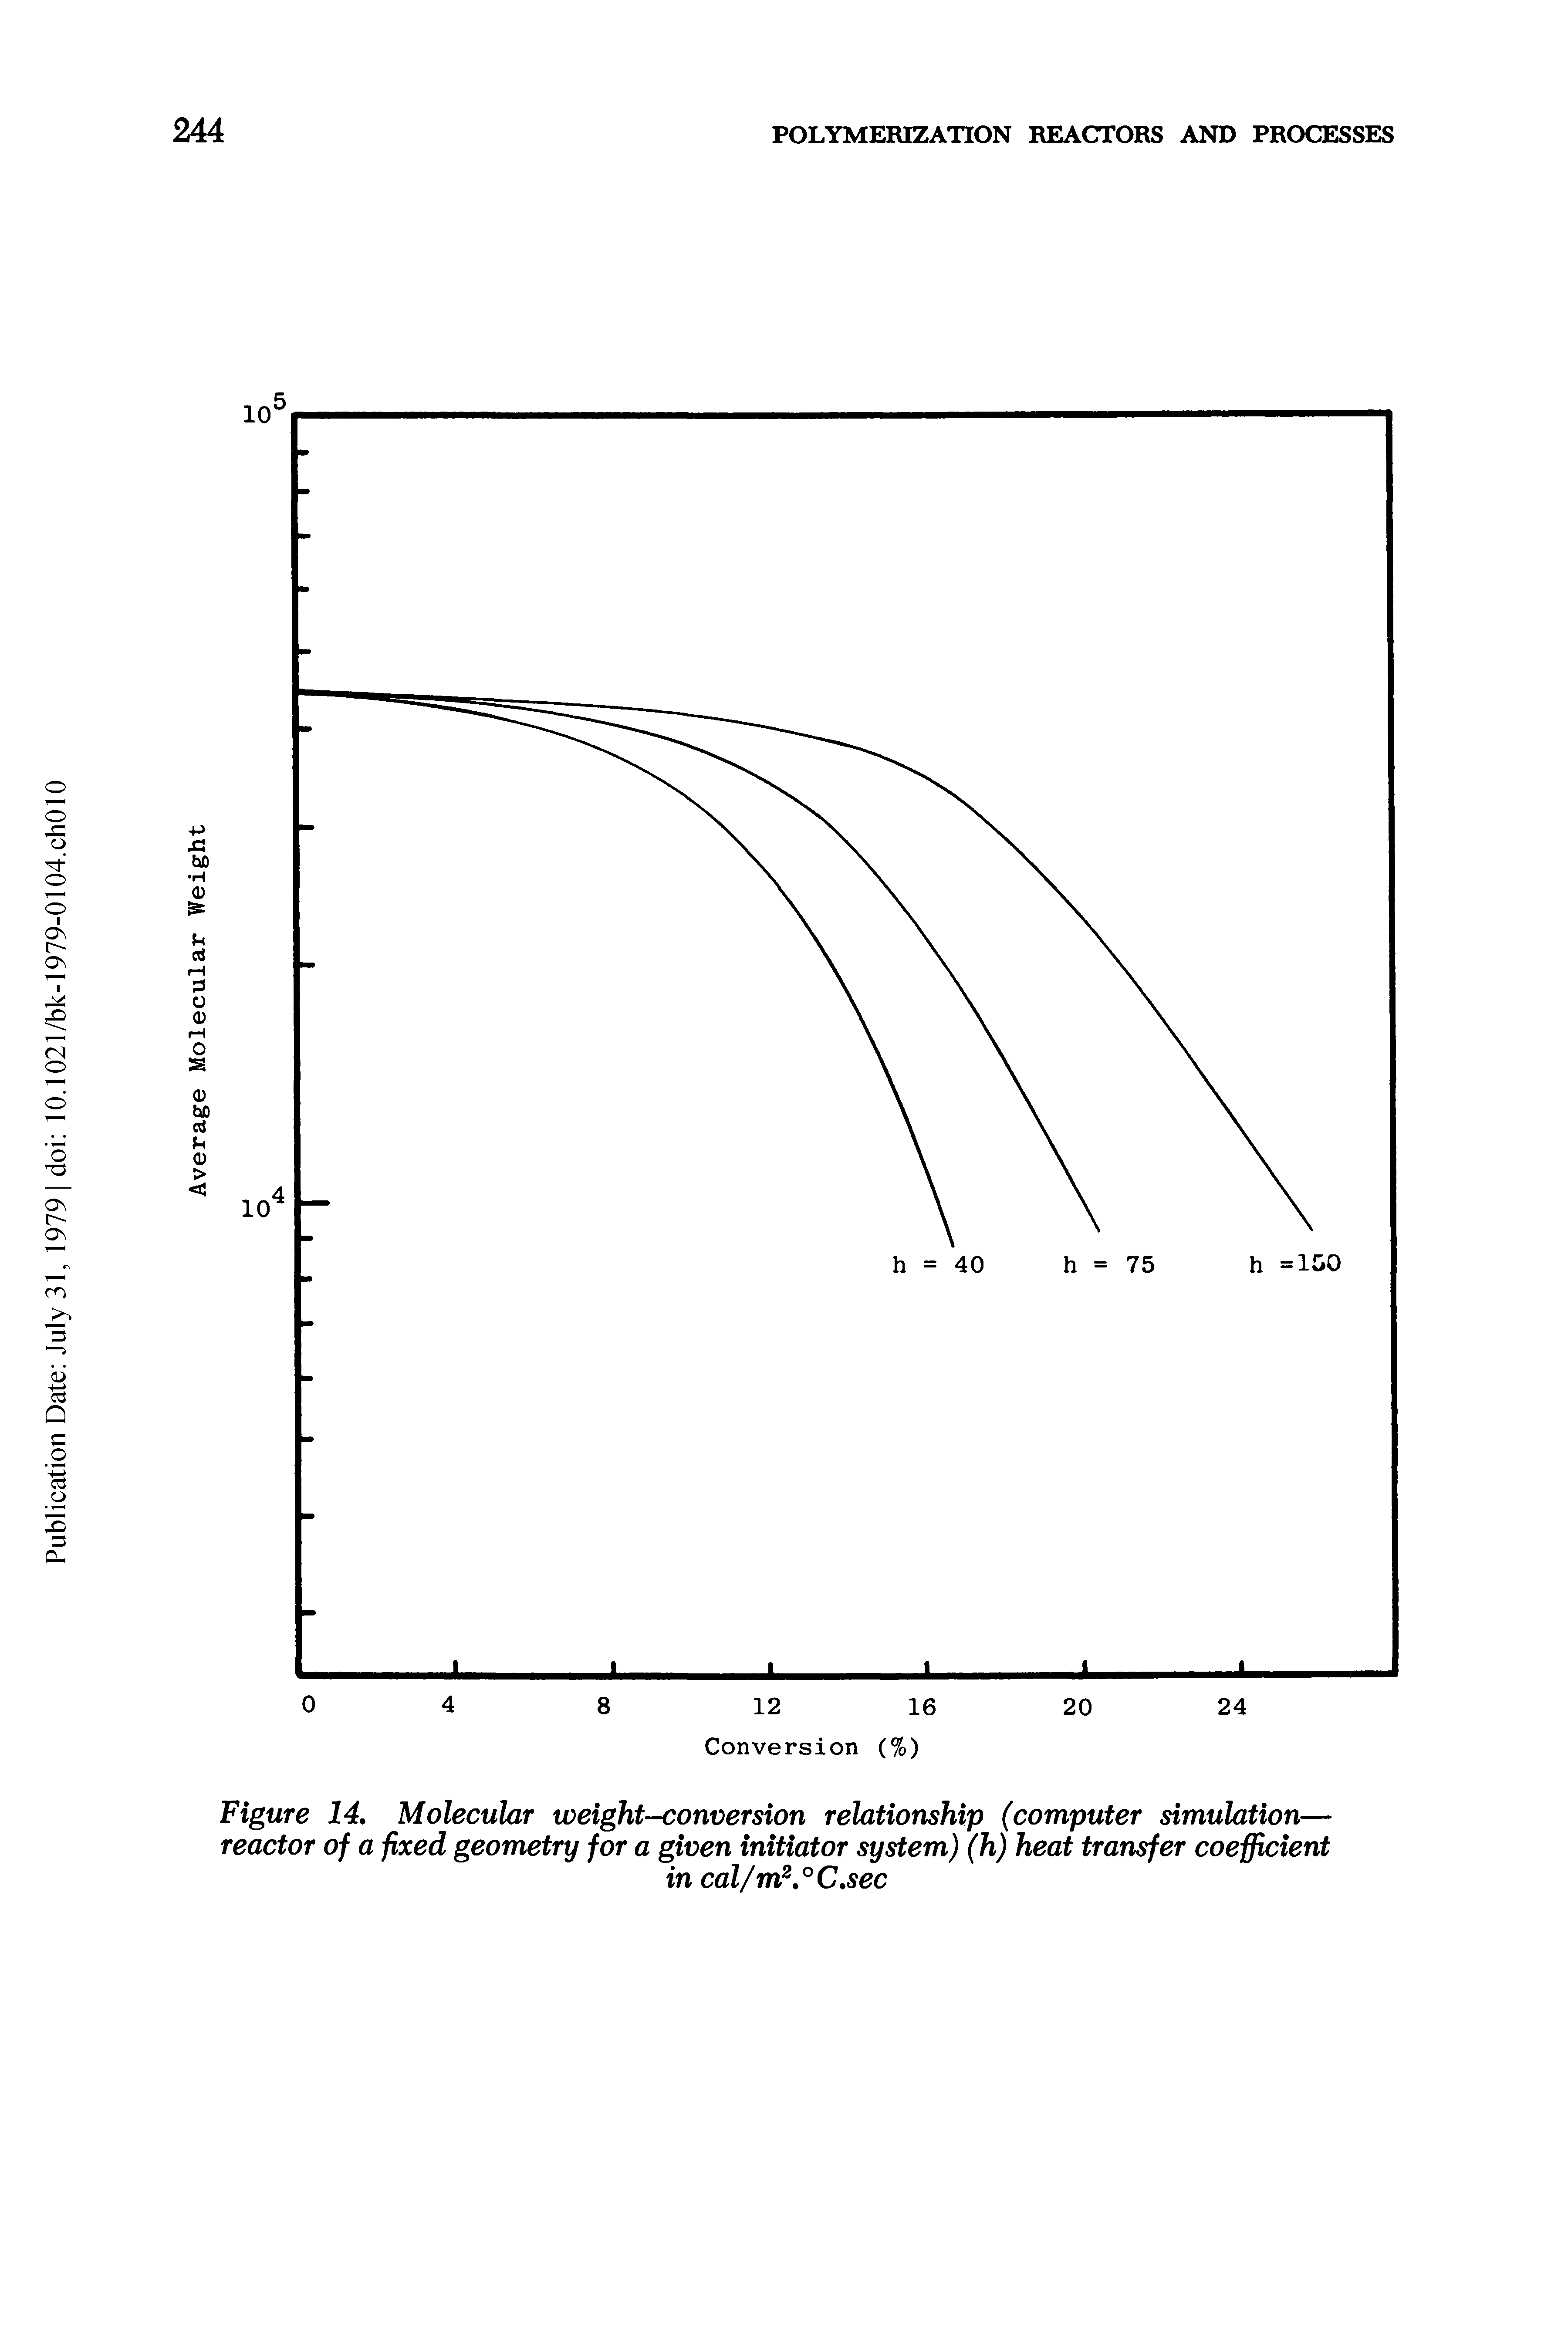 Figure 14, Molecular weight-conversion relationship (computer simulation— reactor of a fixed geometry for a given initiator system) (h) heat transfer coefficient...